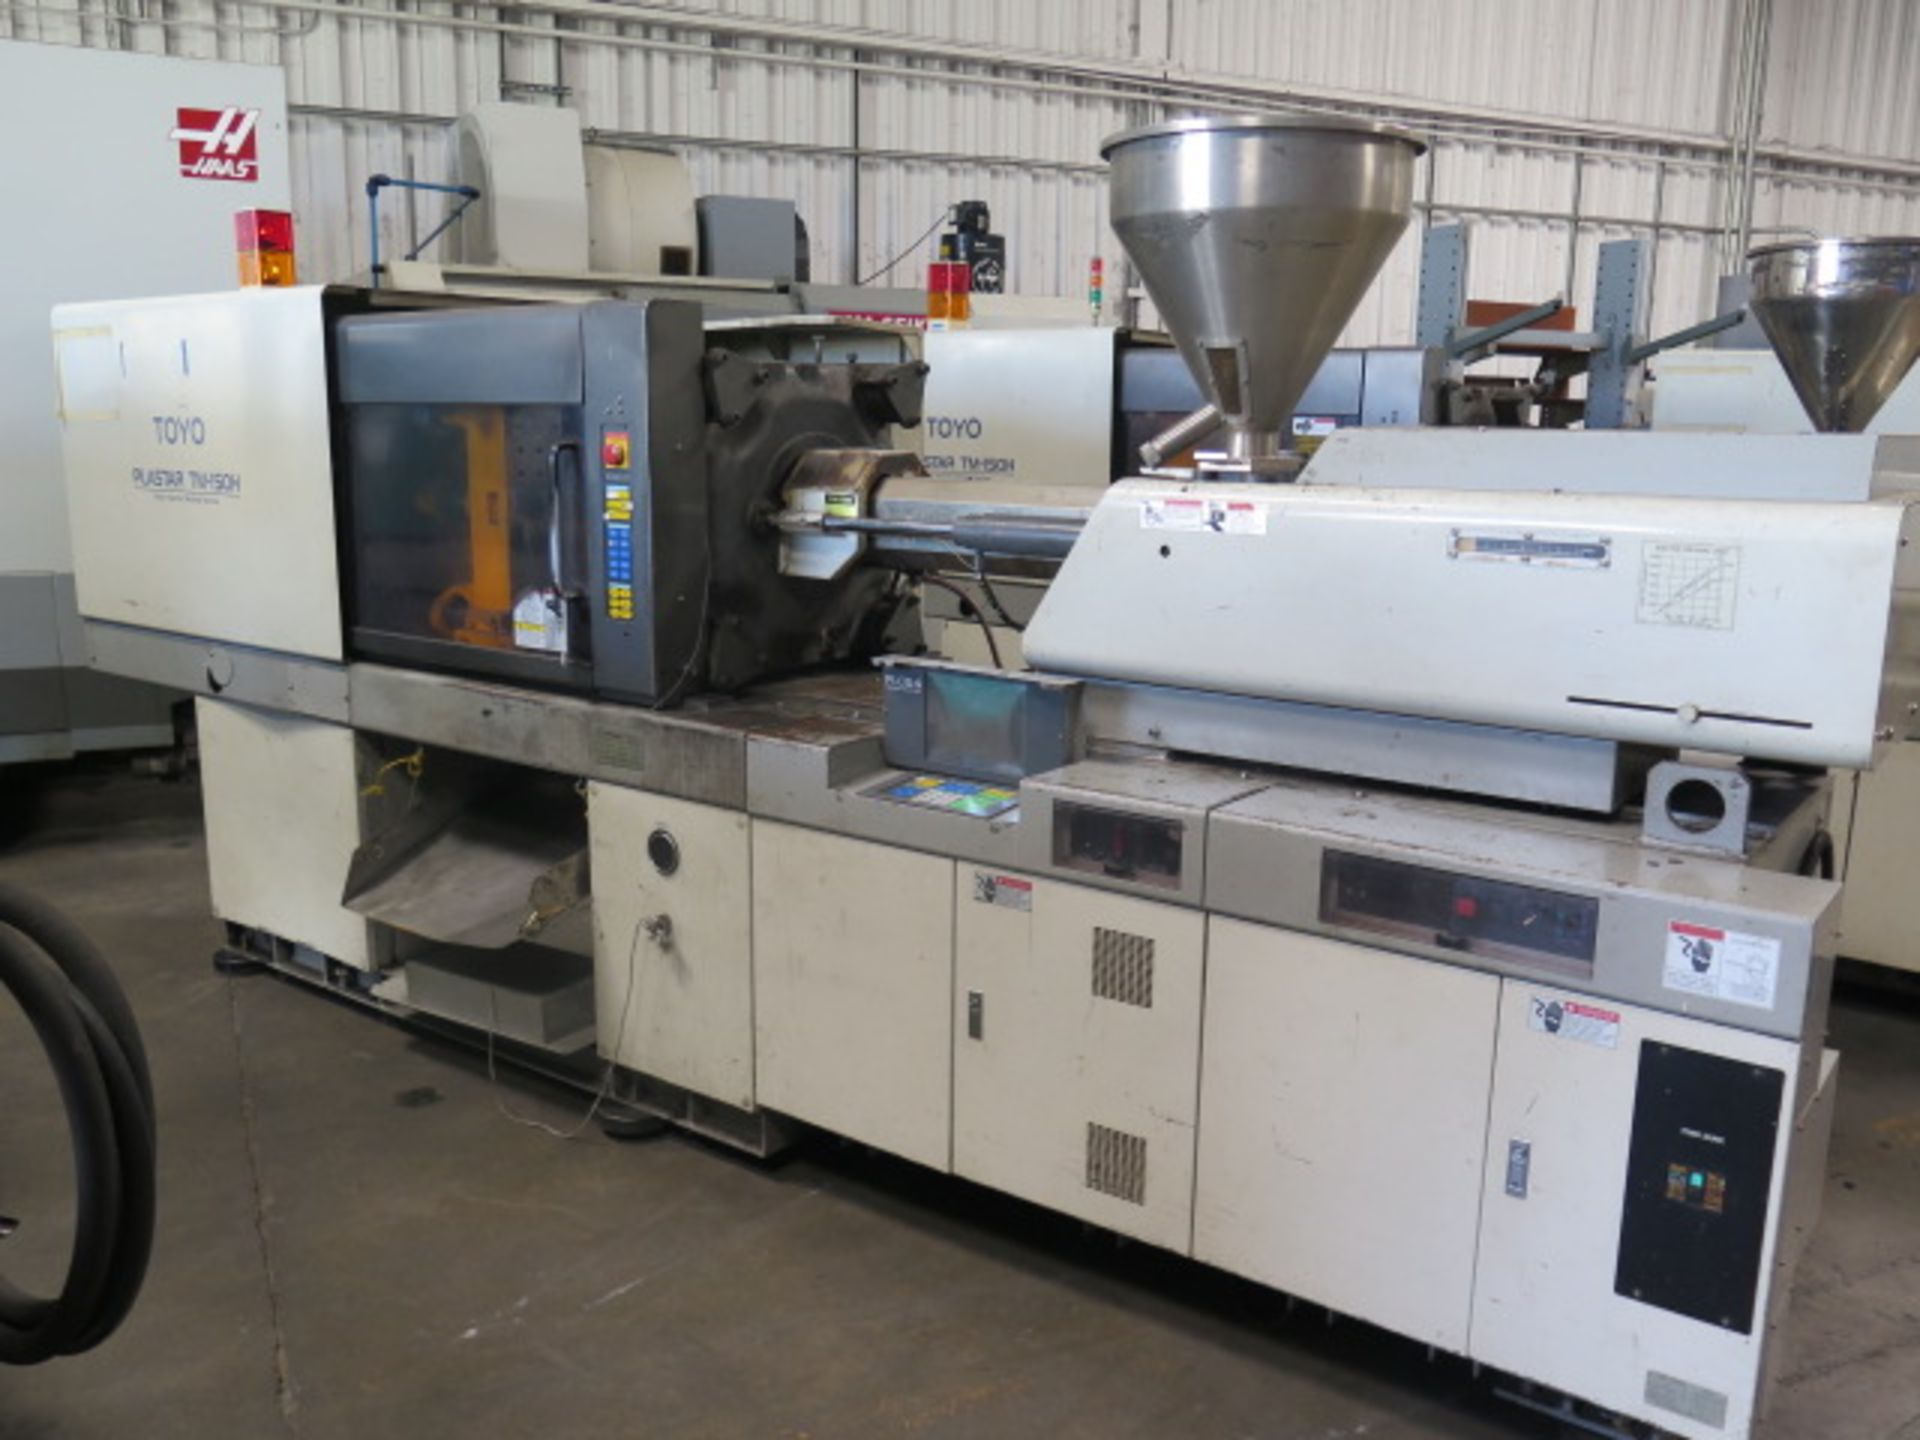 1997 Toyo Machine “Plastar TM-150H” 150 Ton CNC Plastic Injection Molding s/n 1140036, SOLD AS IS